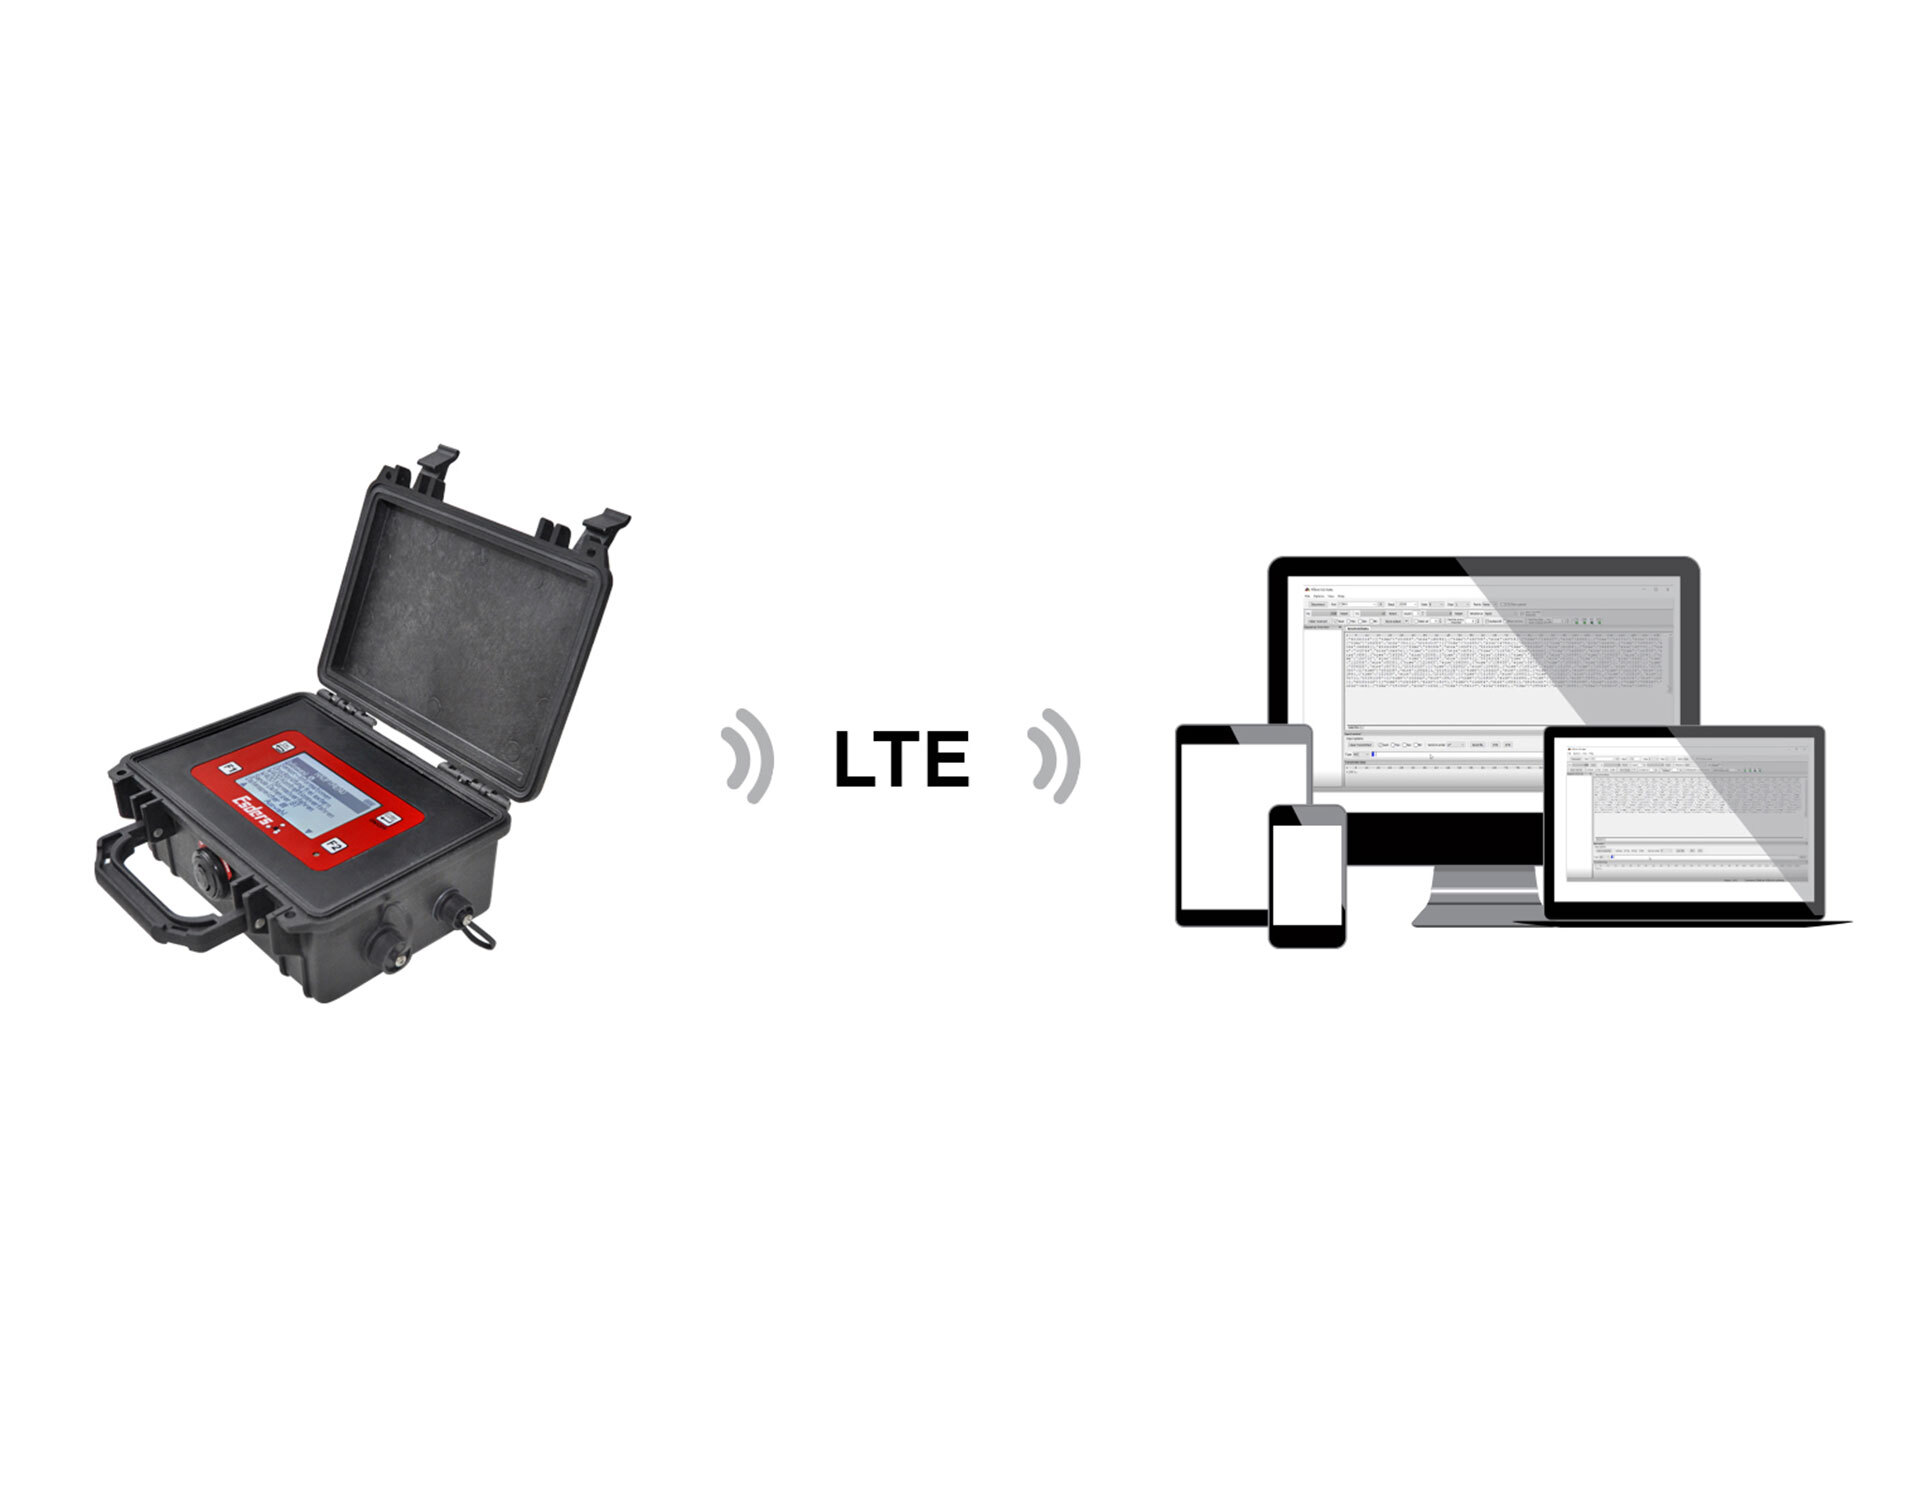  Data transmission to the office with smart memo LTE